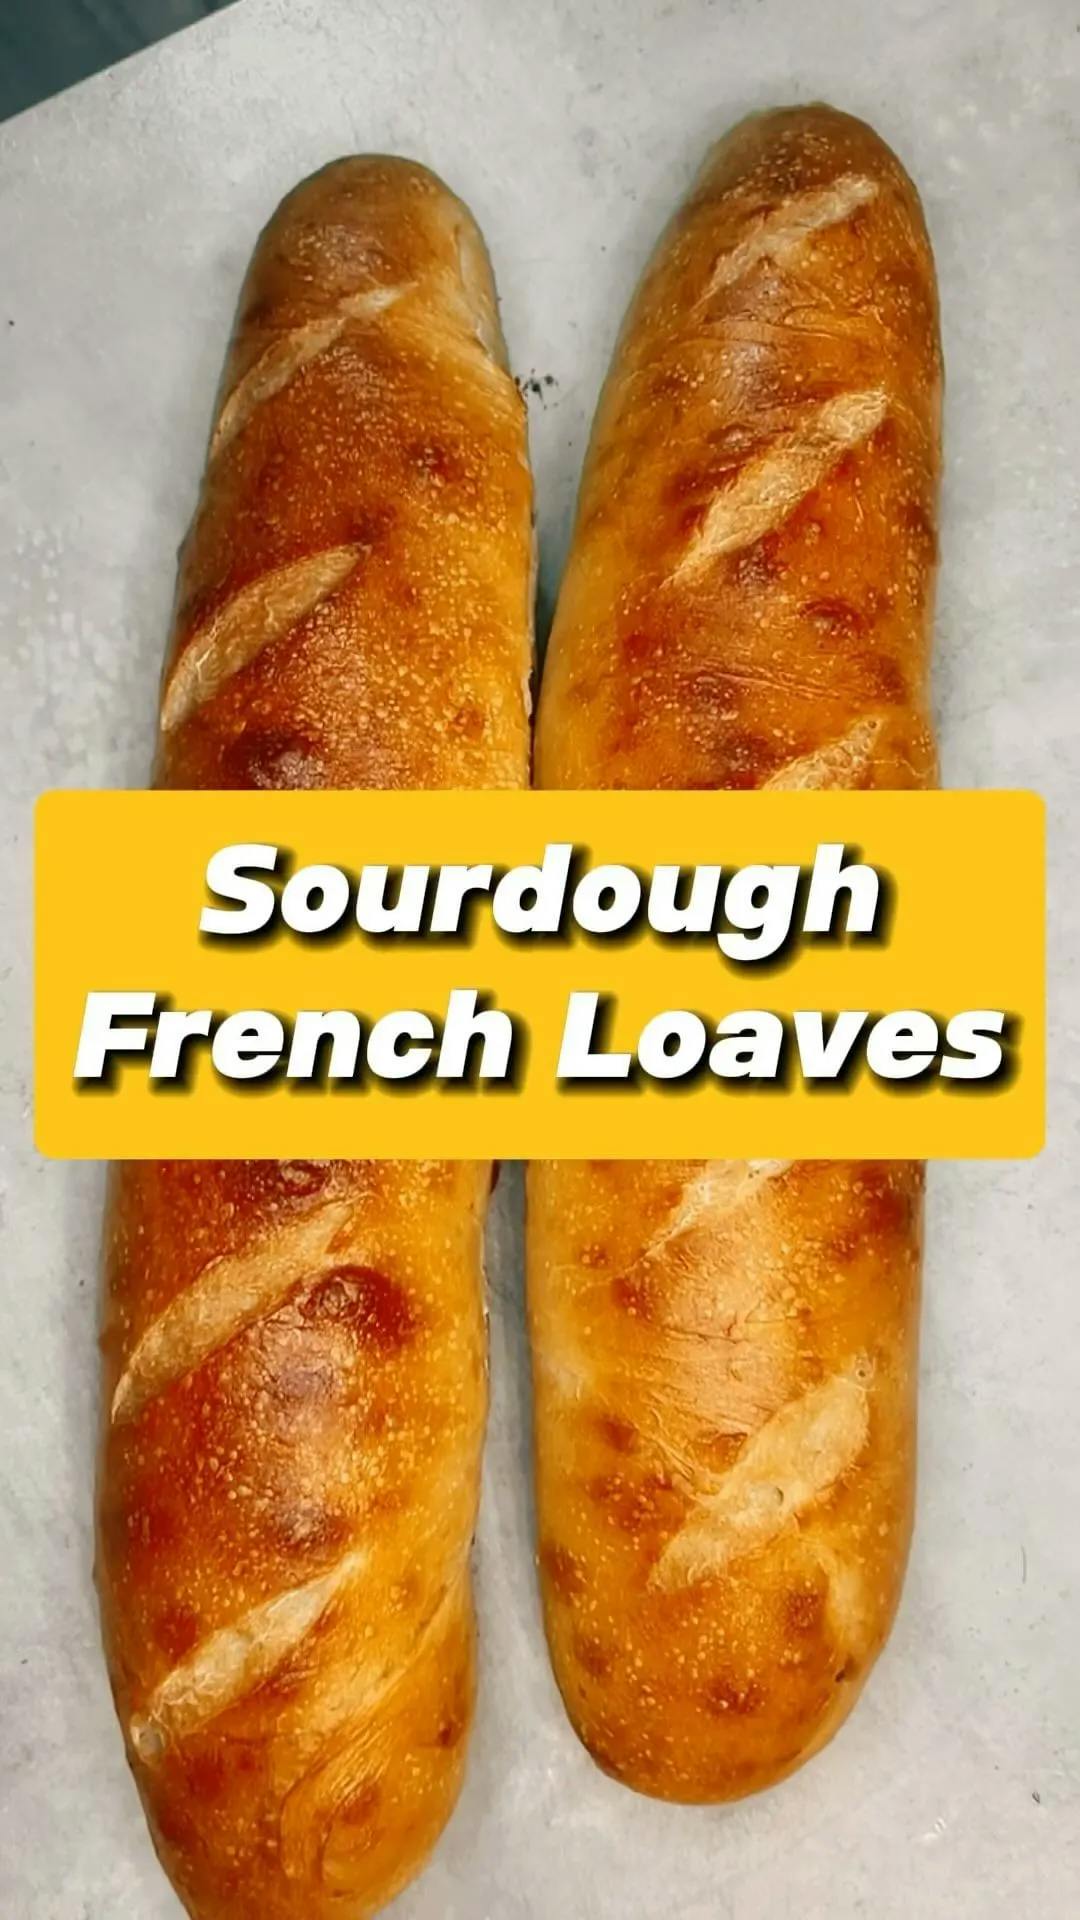 Picture for SOURDOUGH FRENCH LOAVES